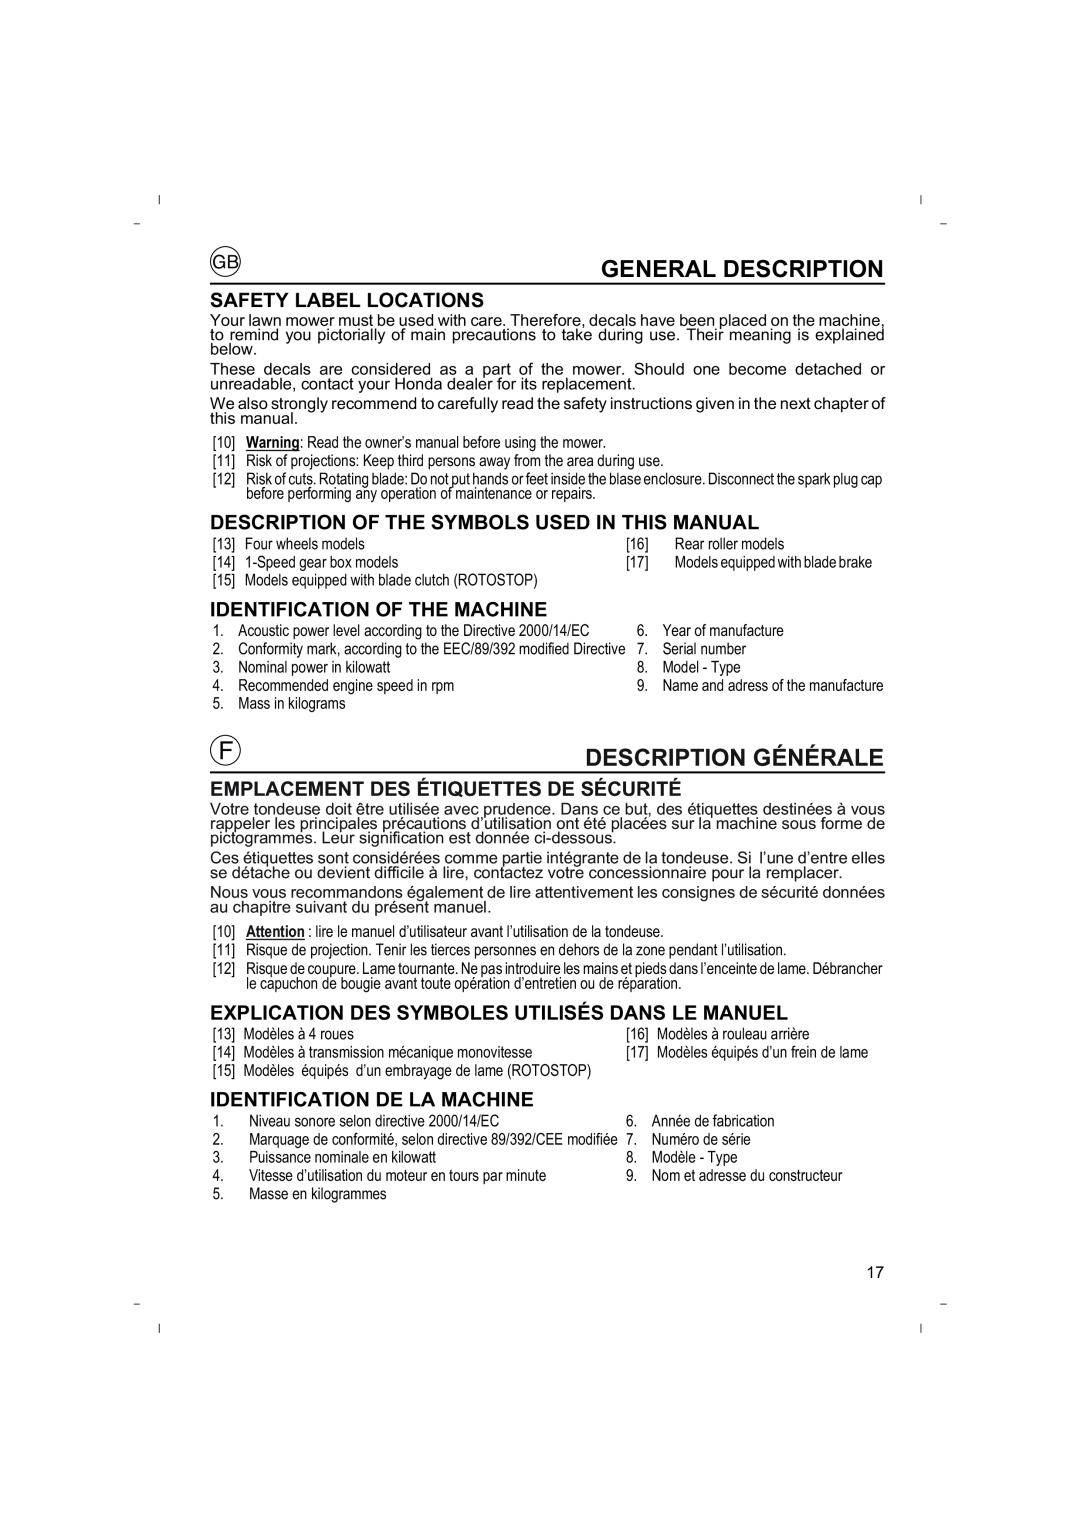 Honda Power Equipment HRB425C Safety Label Locations, Description Of The Symbols Used In This Manual, General Description 